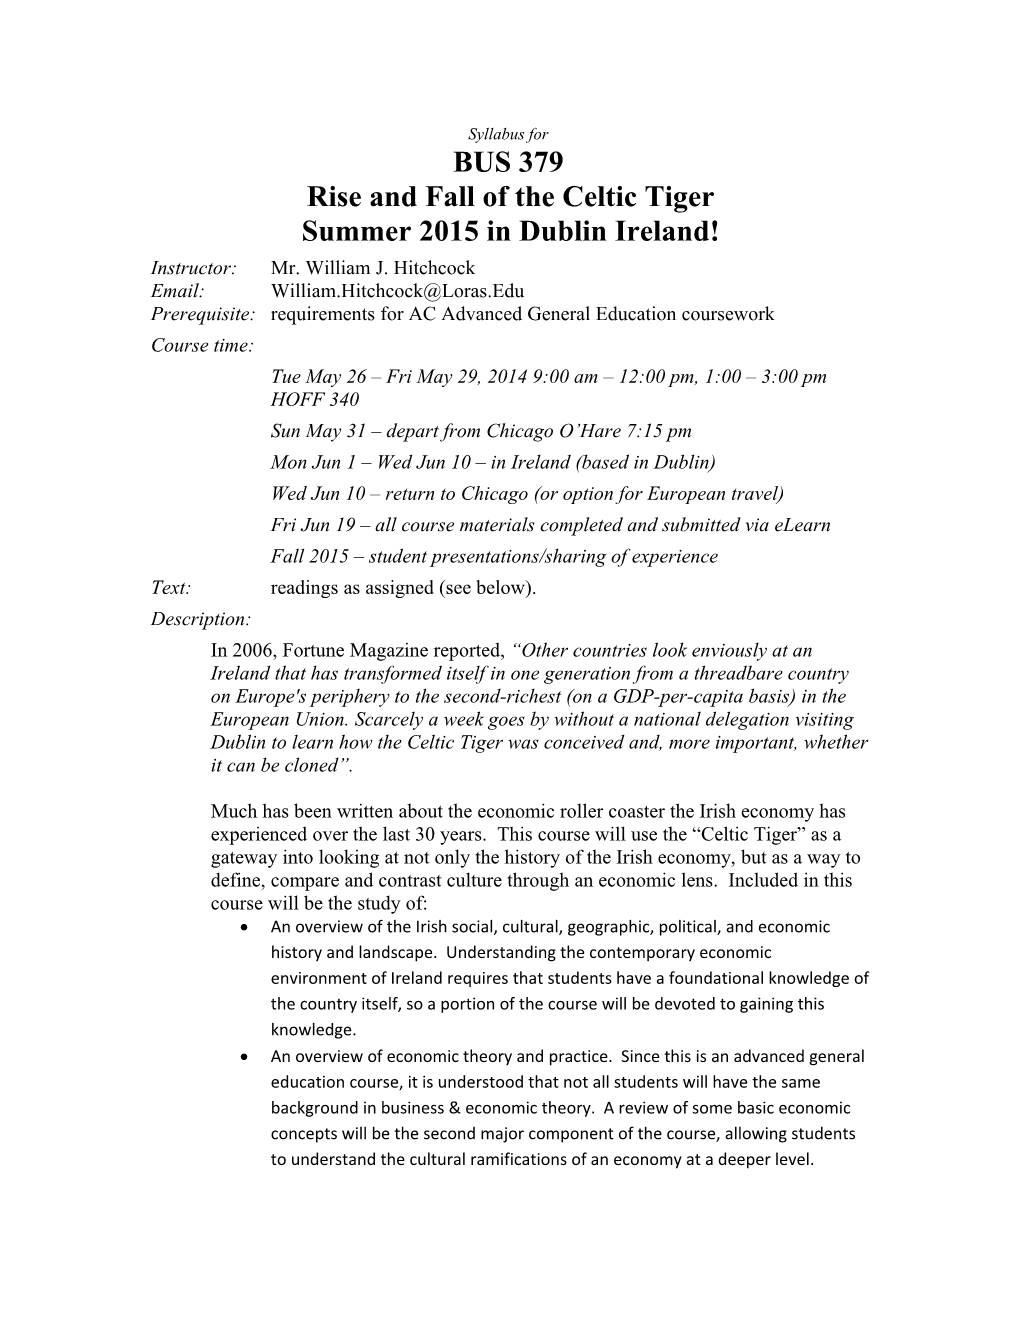 Syllabus for BUS 379 Rise and Fall of the Celtic Tiger Summer 2015 in Dublin Ireland!